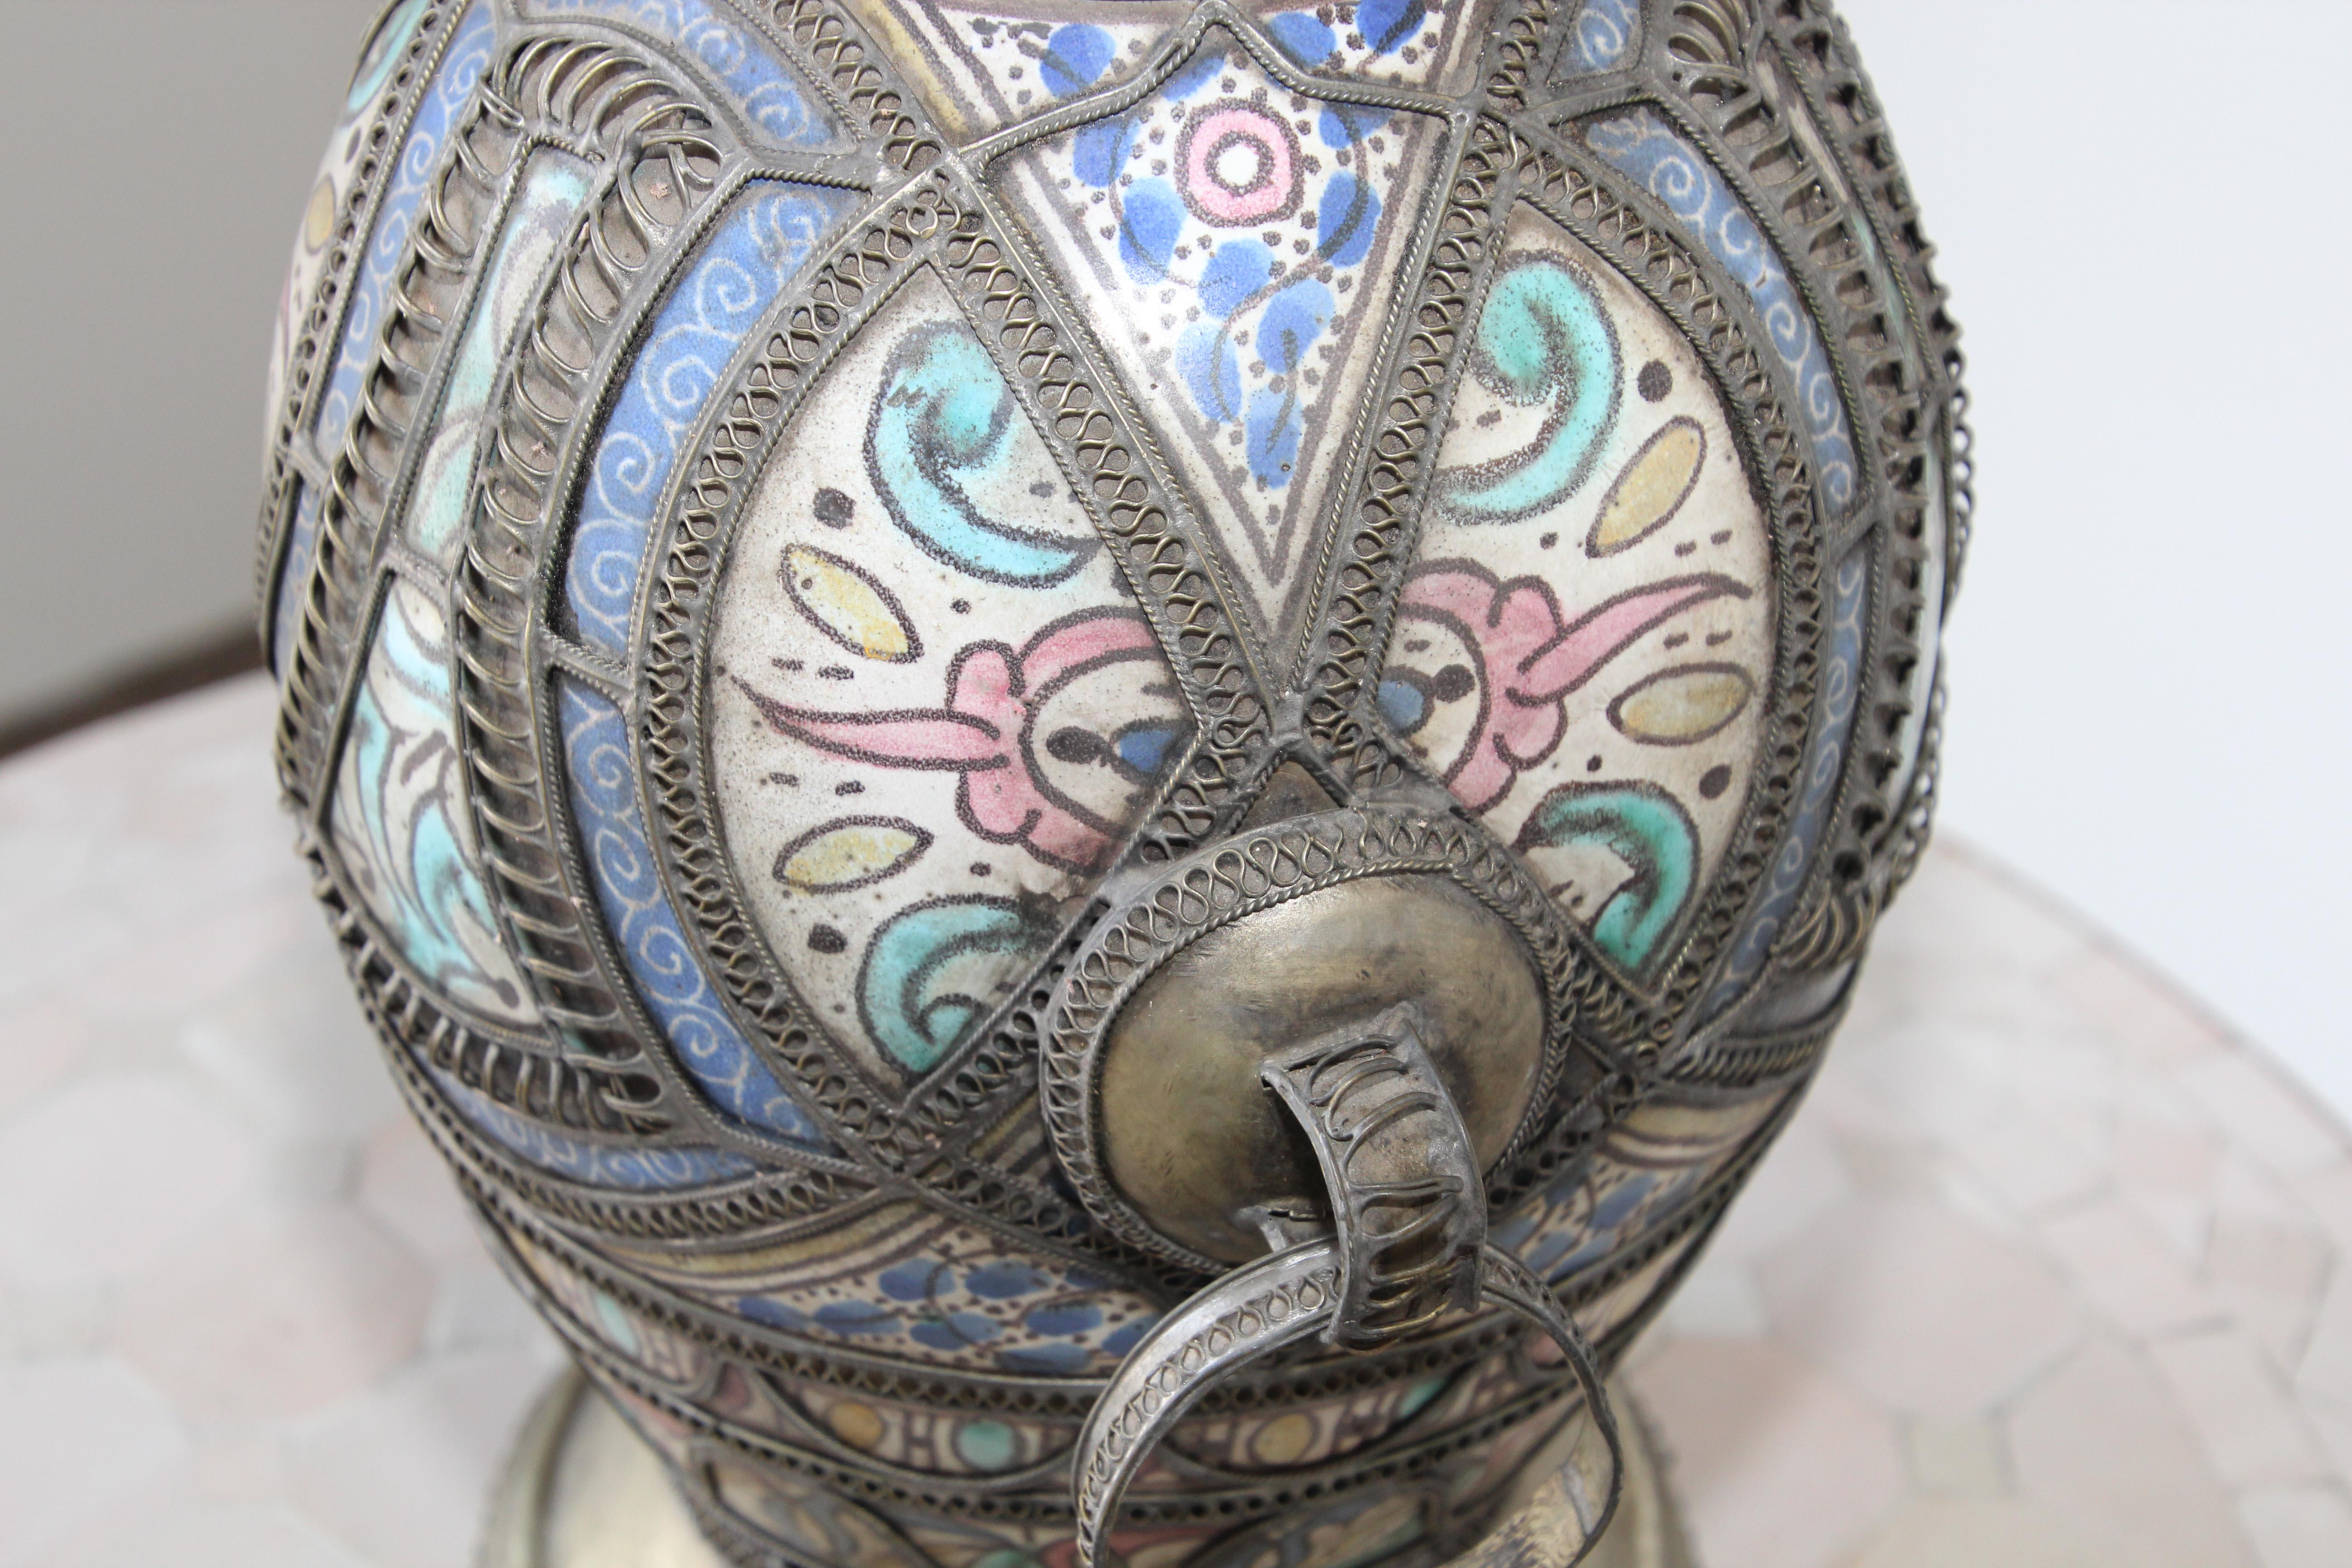 Antique Moroccan Ceramic Footed Vase from Fez with Silver Filigree For Sale 10